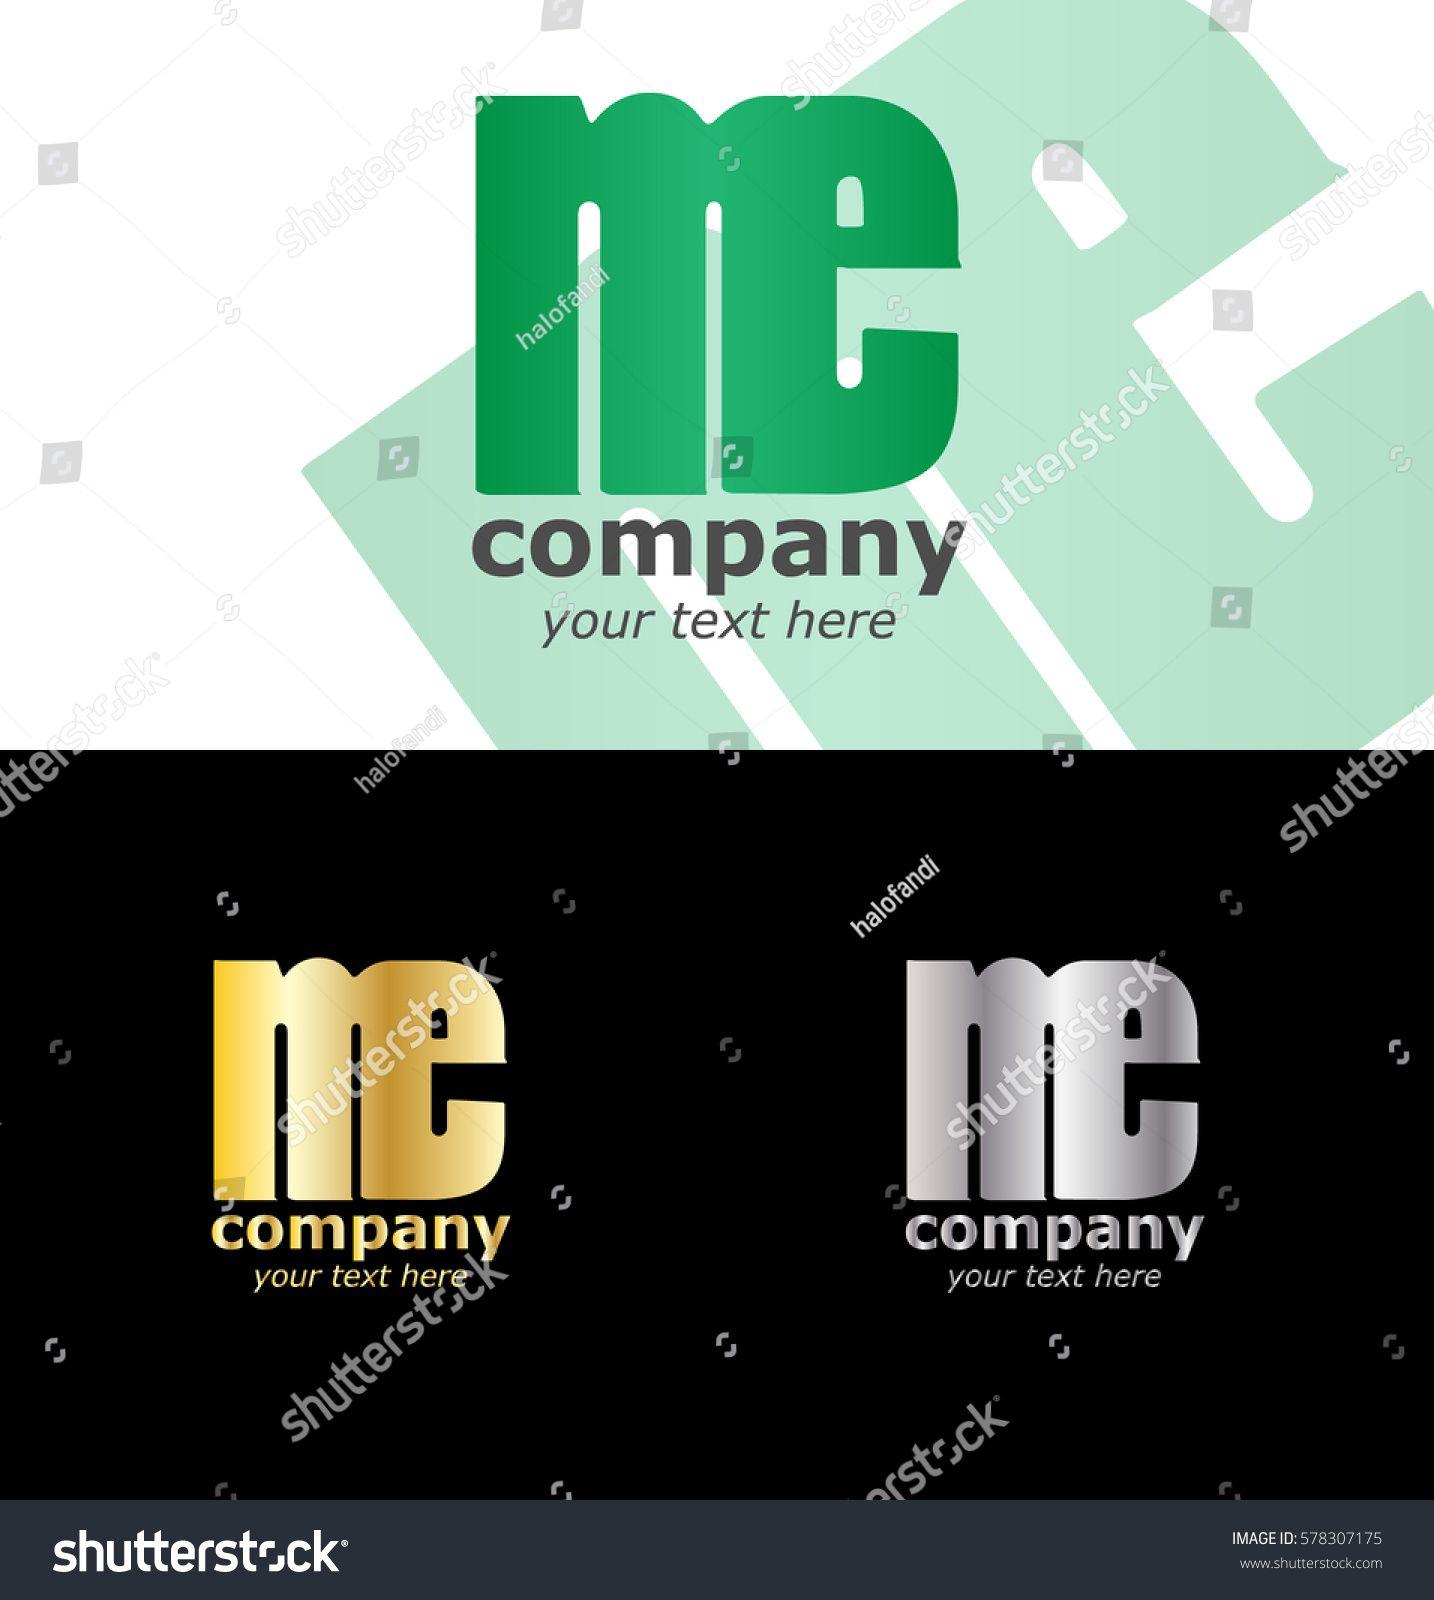 Green and Silver Logo - Initial Letter ME NE Logo Design in Green, Gold or Silver Colors ...